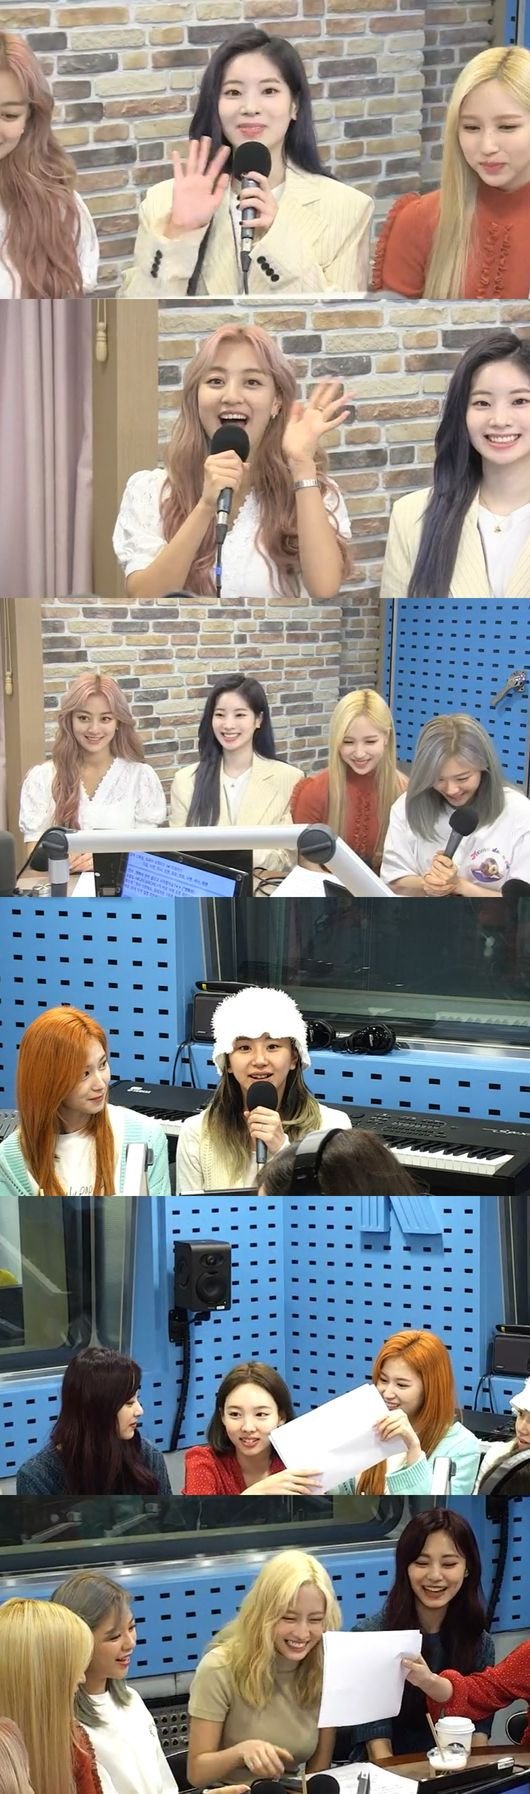 twice-talk-about-their-new-obsessions,-new-hobbies-and-more-on-radio-show-1